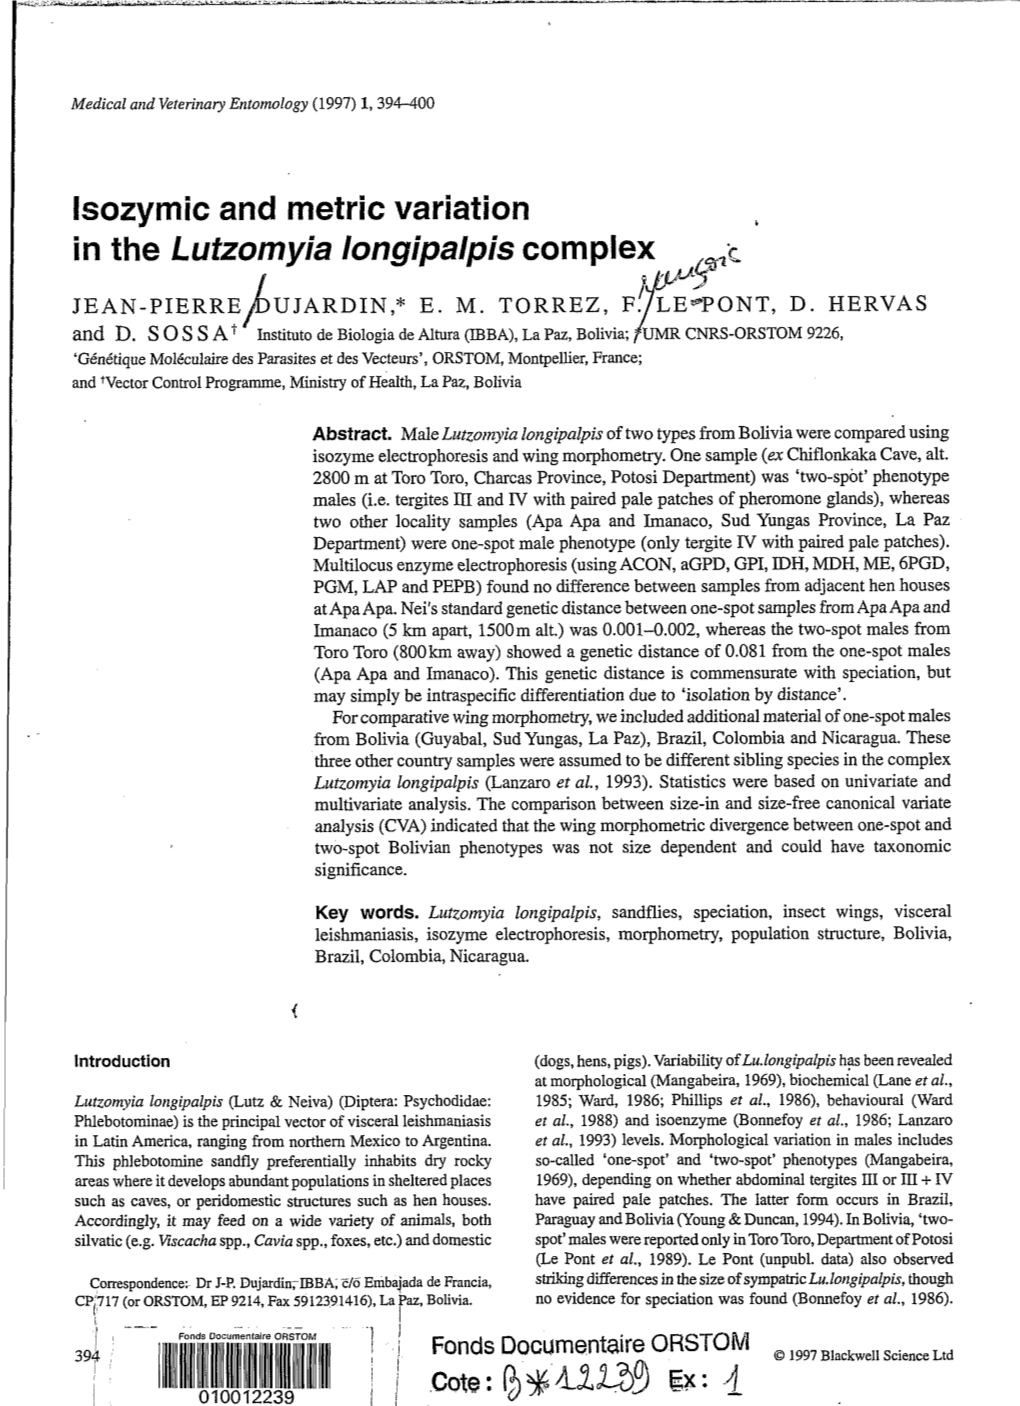 Isozymic and Metric Variation in the Lutzomyia Longipalpis Complex